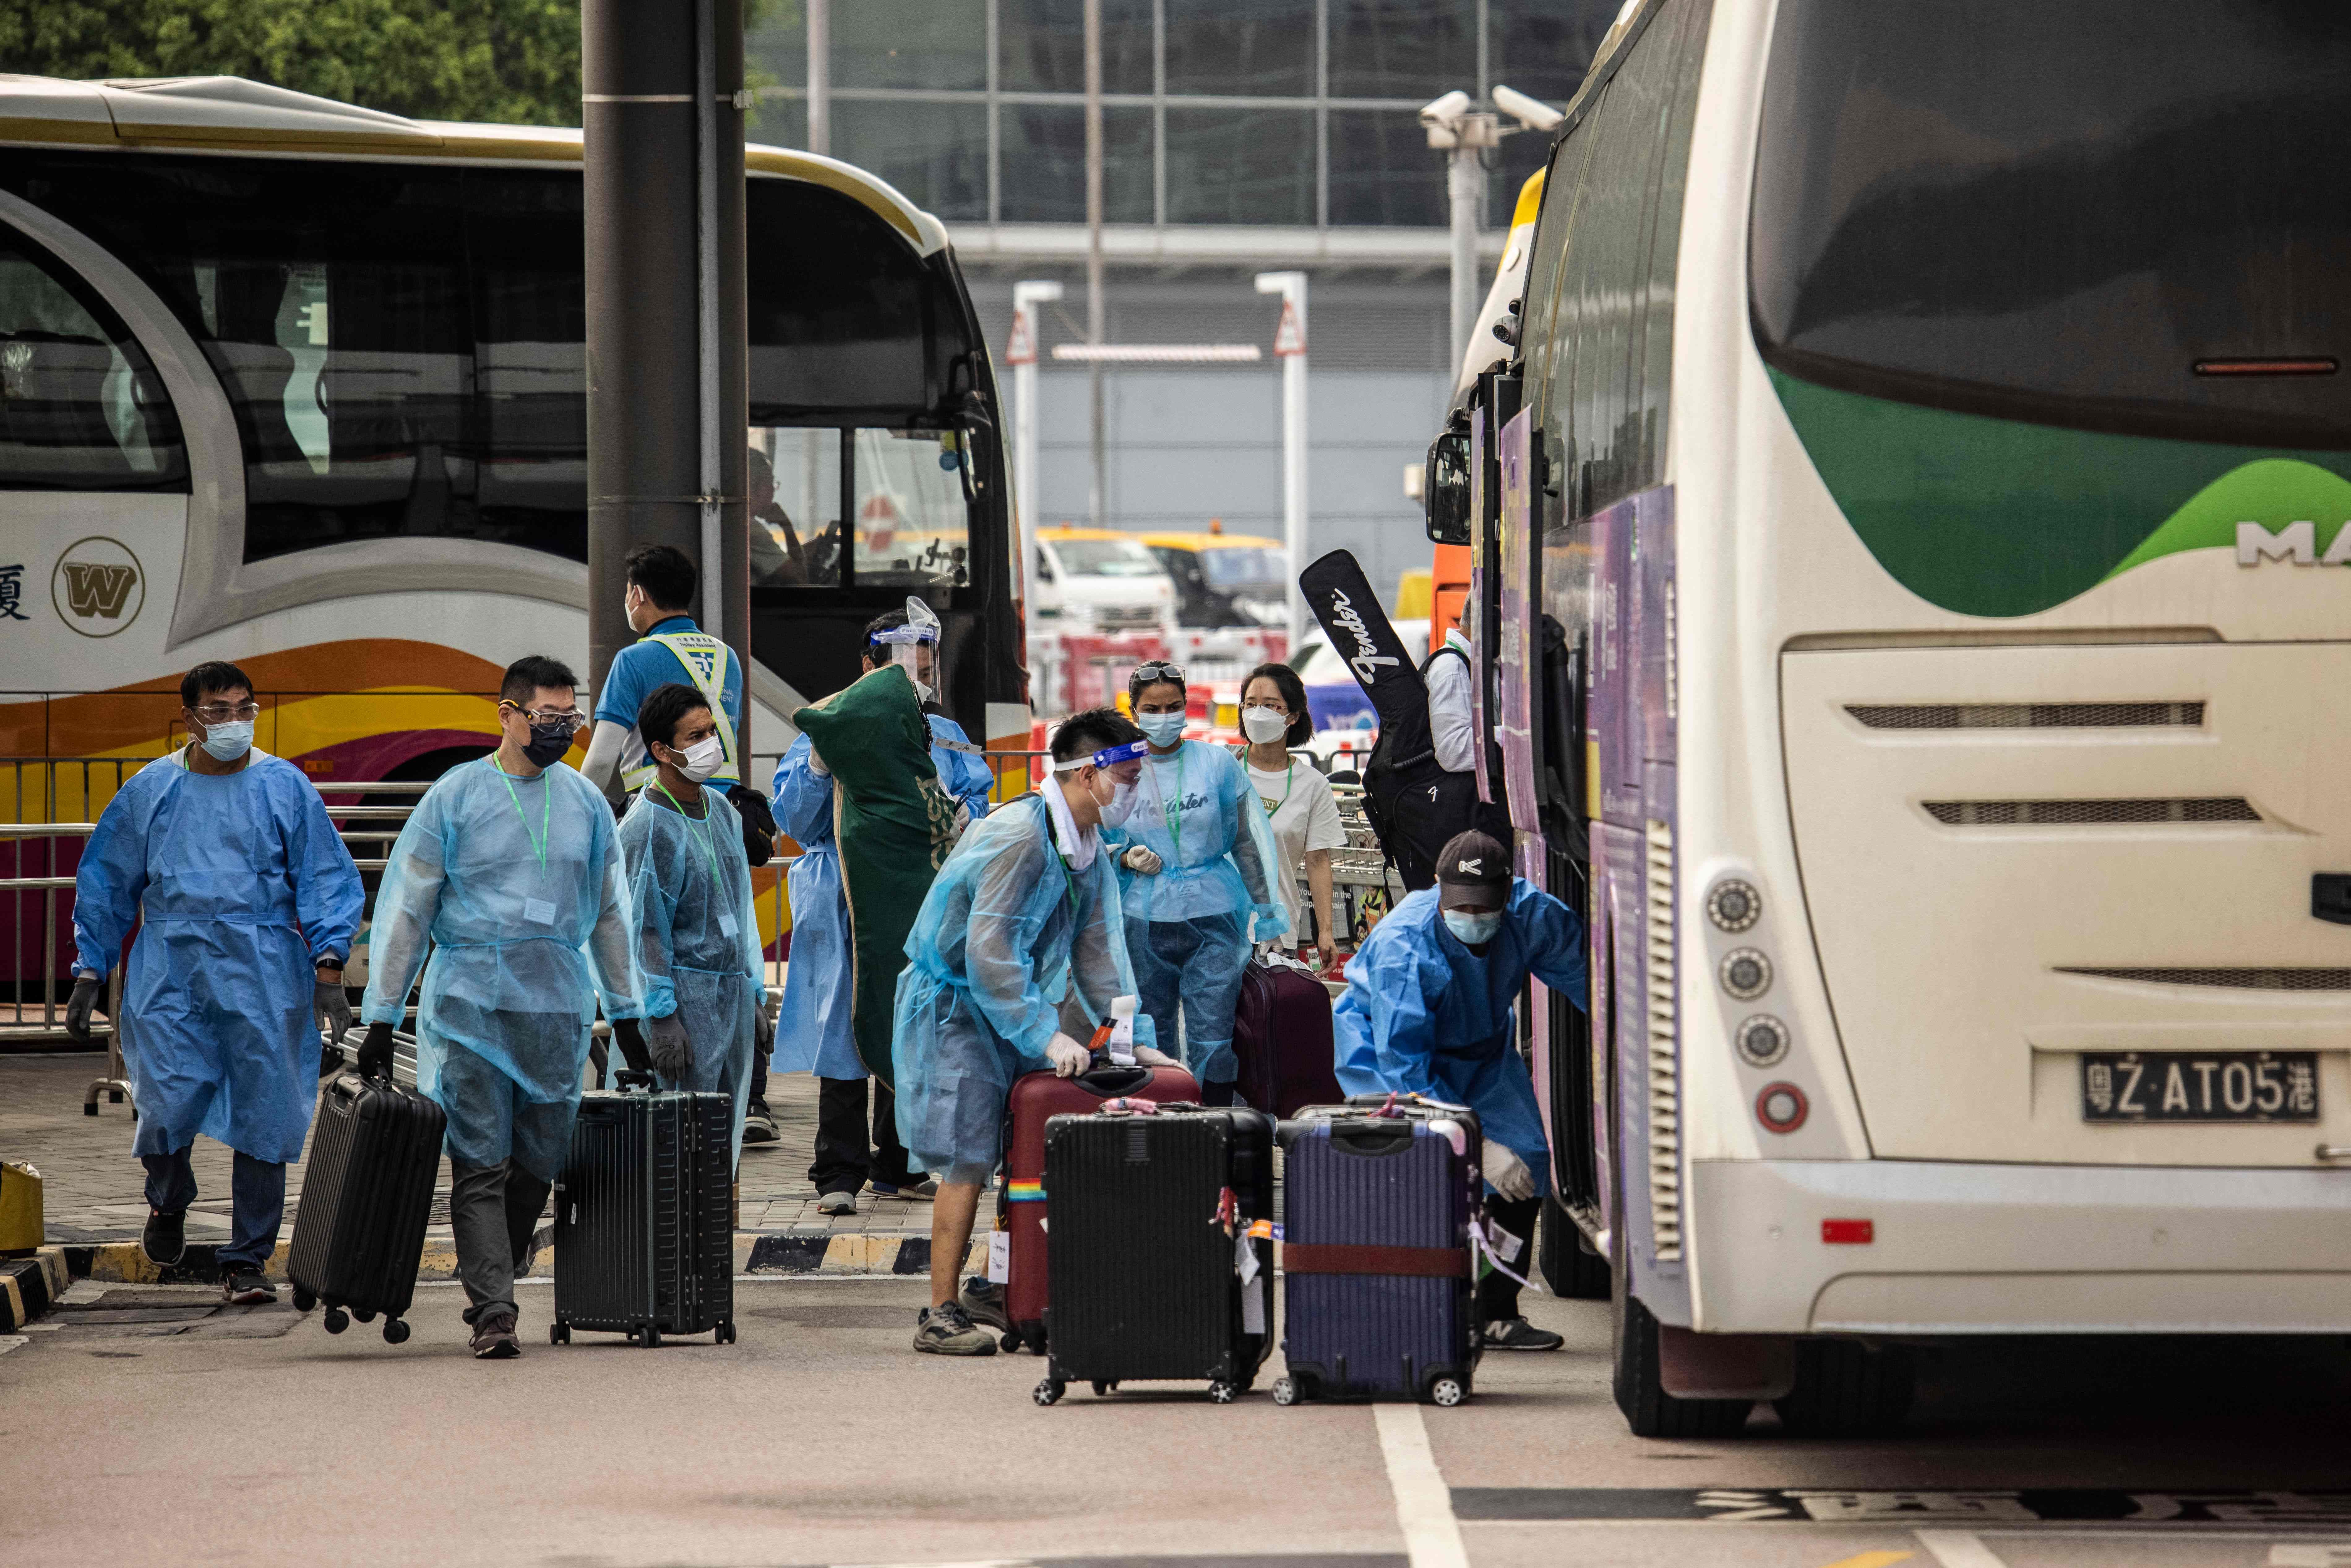 Workers load traveller's luggage onto a bus at Hong Kong International Airport before taking them to hotel quarantine on September 23, 2022. - Hong Kong announced on September 23 it will end mandatory hotel quarantine, scrapping some of the world's toughest travel restrictions that have battered the economy and kept the finance hub internationally isolated.